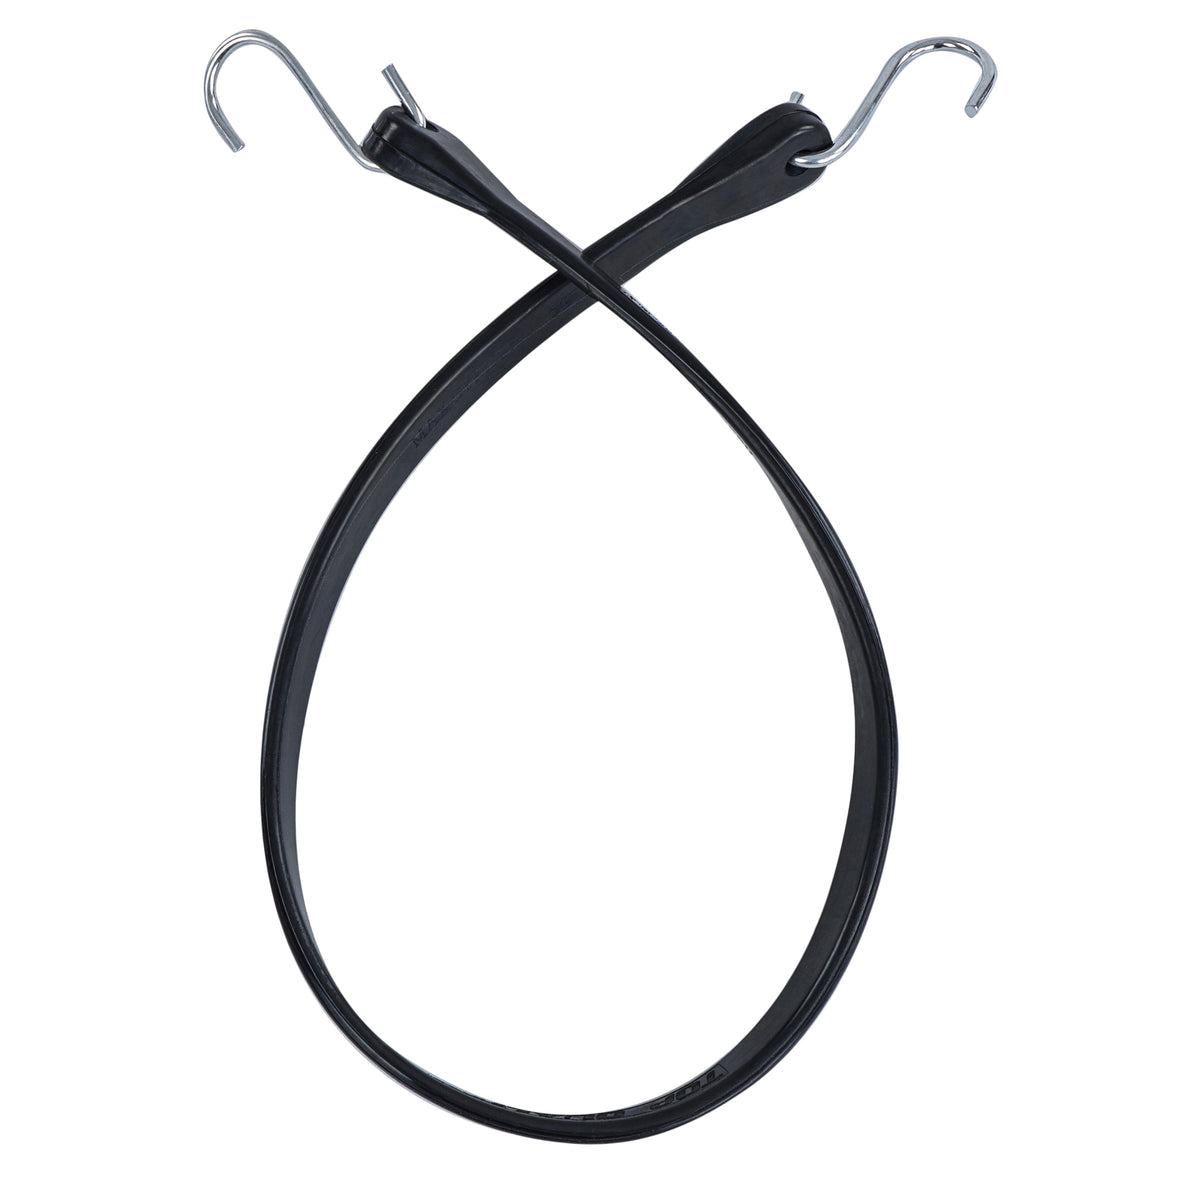 EPDM Rubber Straps with Hooks - 31in Black Rubber Bungee Cords, 10Pk